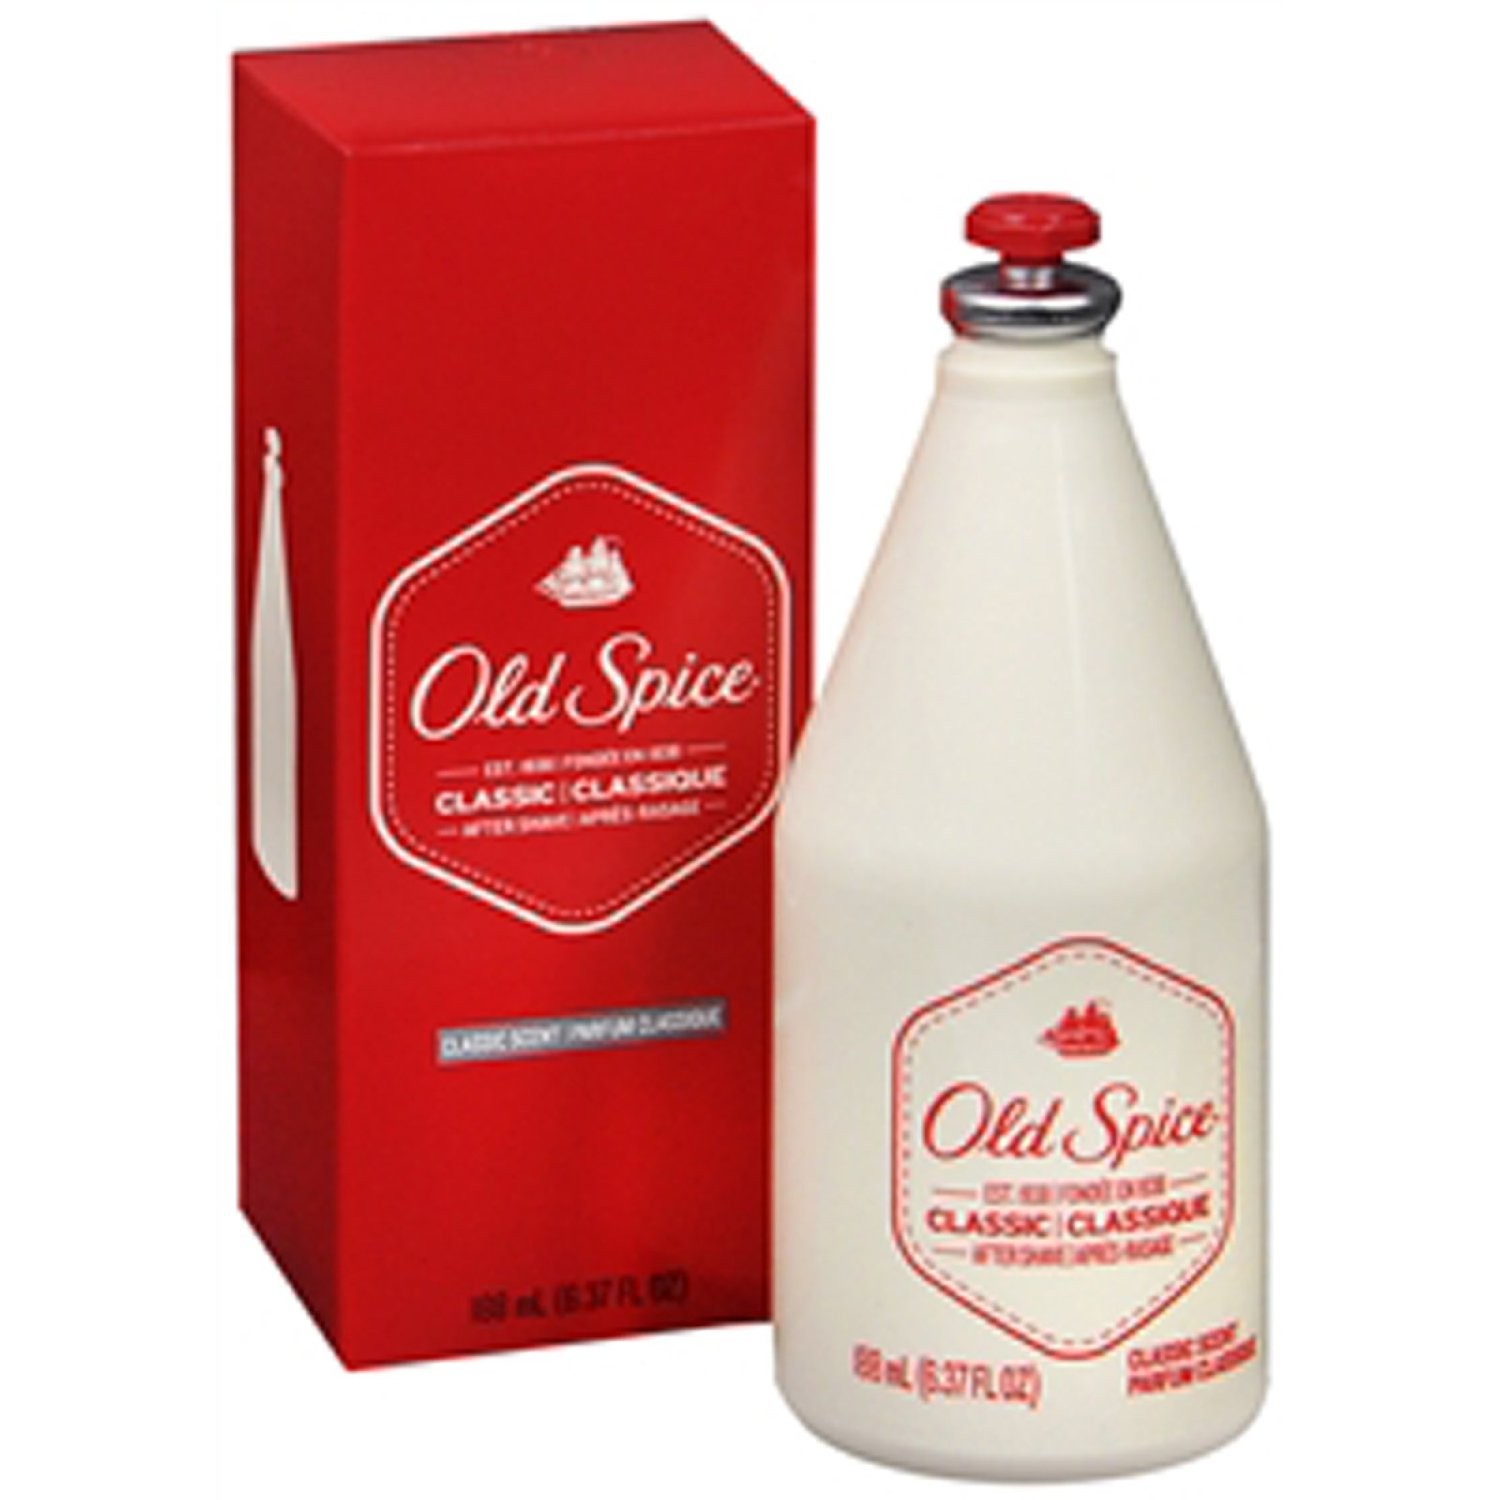 Old Spice Classic After Shave - 6.37 fl oz. | Rite Aid